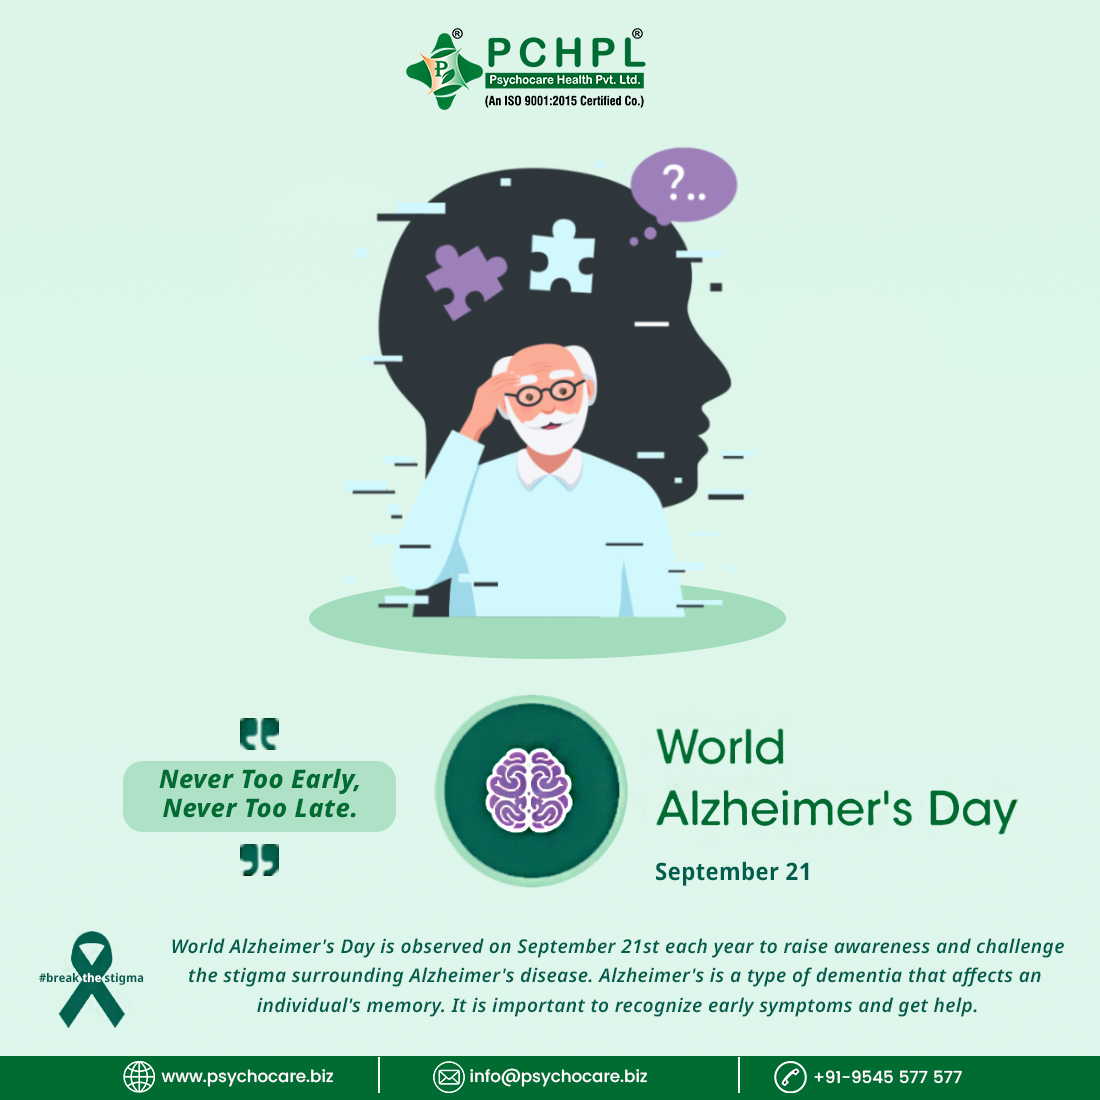 Empower yourself with knowledge about Alzheimer's—it's never too early to learn, and it's never too late to act. Together, we can make a difference. #NeverTooEarlyNeverTooLate #WorldAlzheimersDay #AlzheimersAwareness #supreetsingh  #PhdchamberofCommerce #CancareInc #pchpl